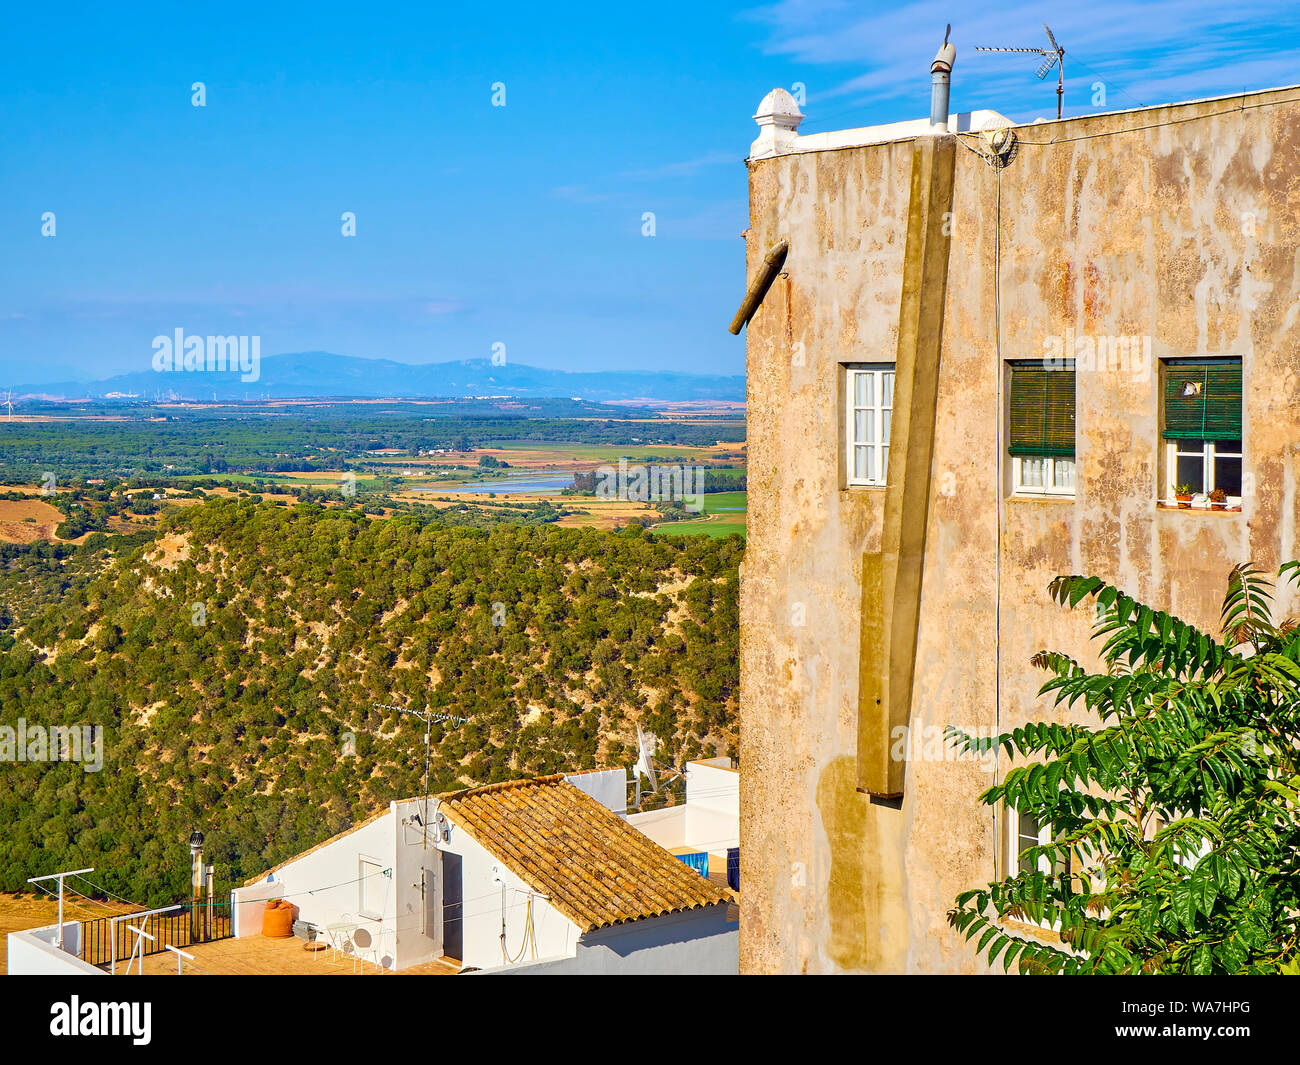 A view of the Region of La Janda with the Marshes of Barbate river. View from La Corredera walkway viewpoint. Vejer de la Frontera. Spain Stock Photo